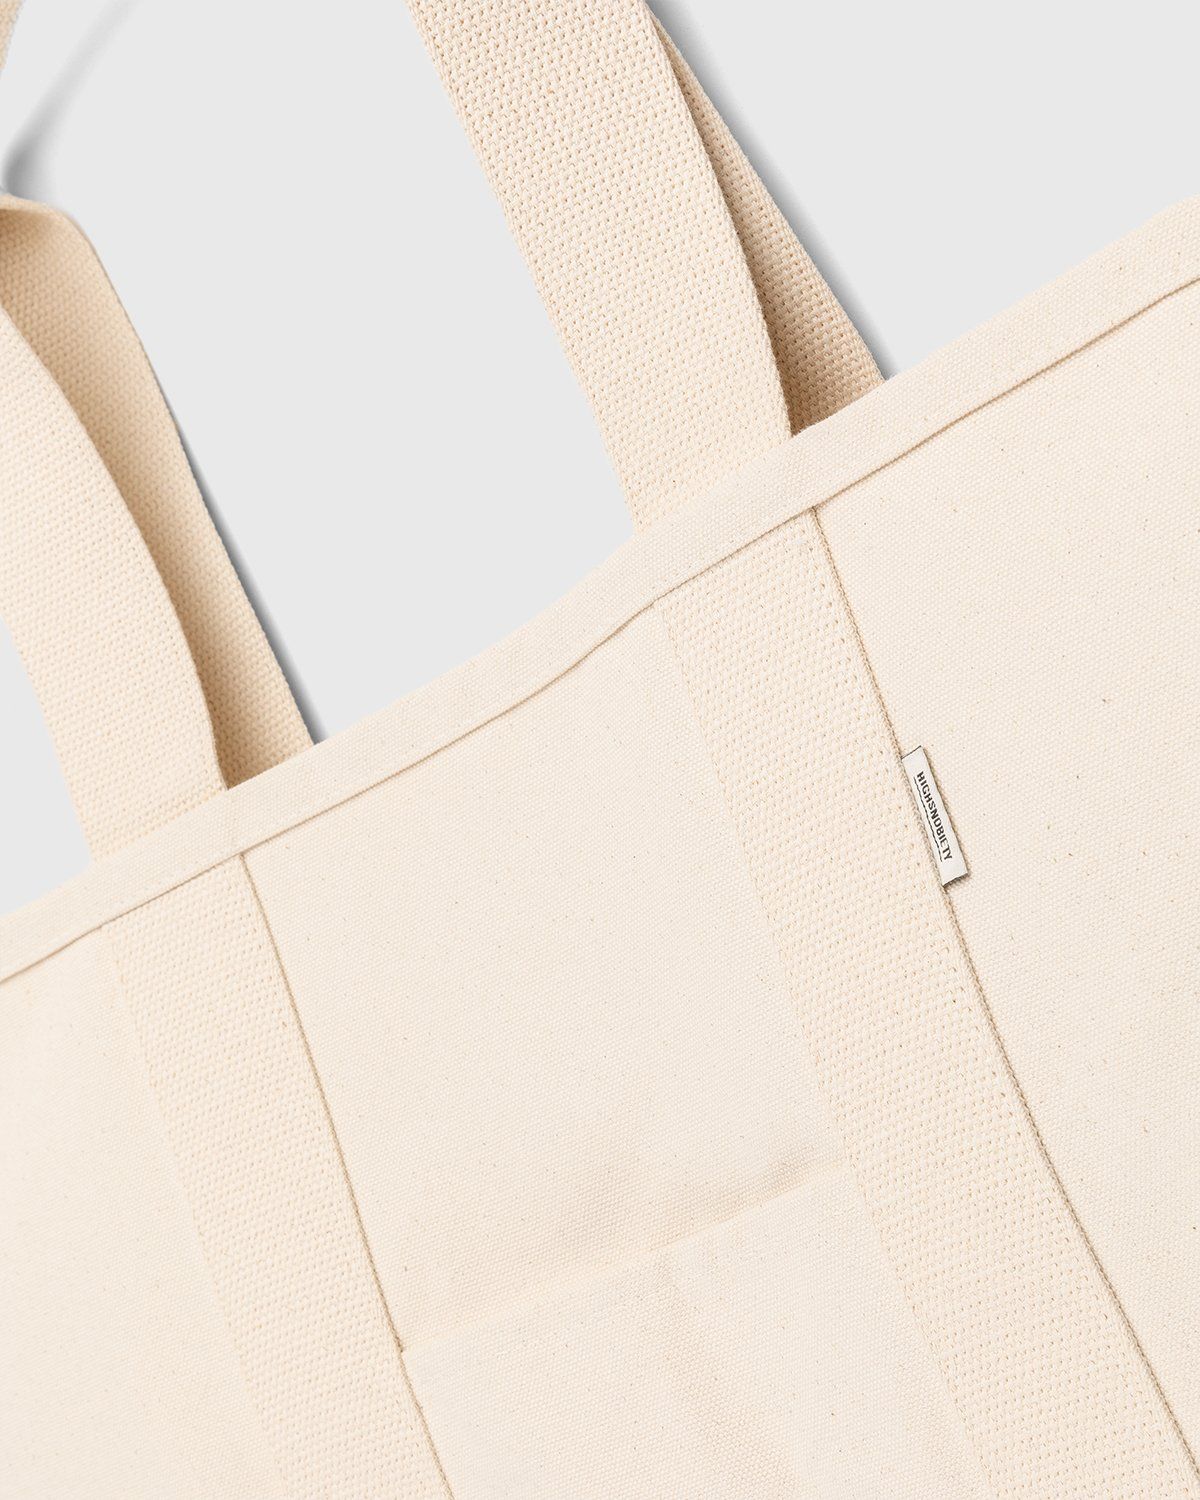 Highsnobiety – Heavy Canvas Large Shopper Tote Natural - Tote Bags - Beige - Image 4